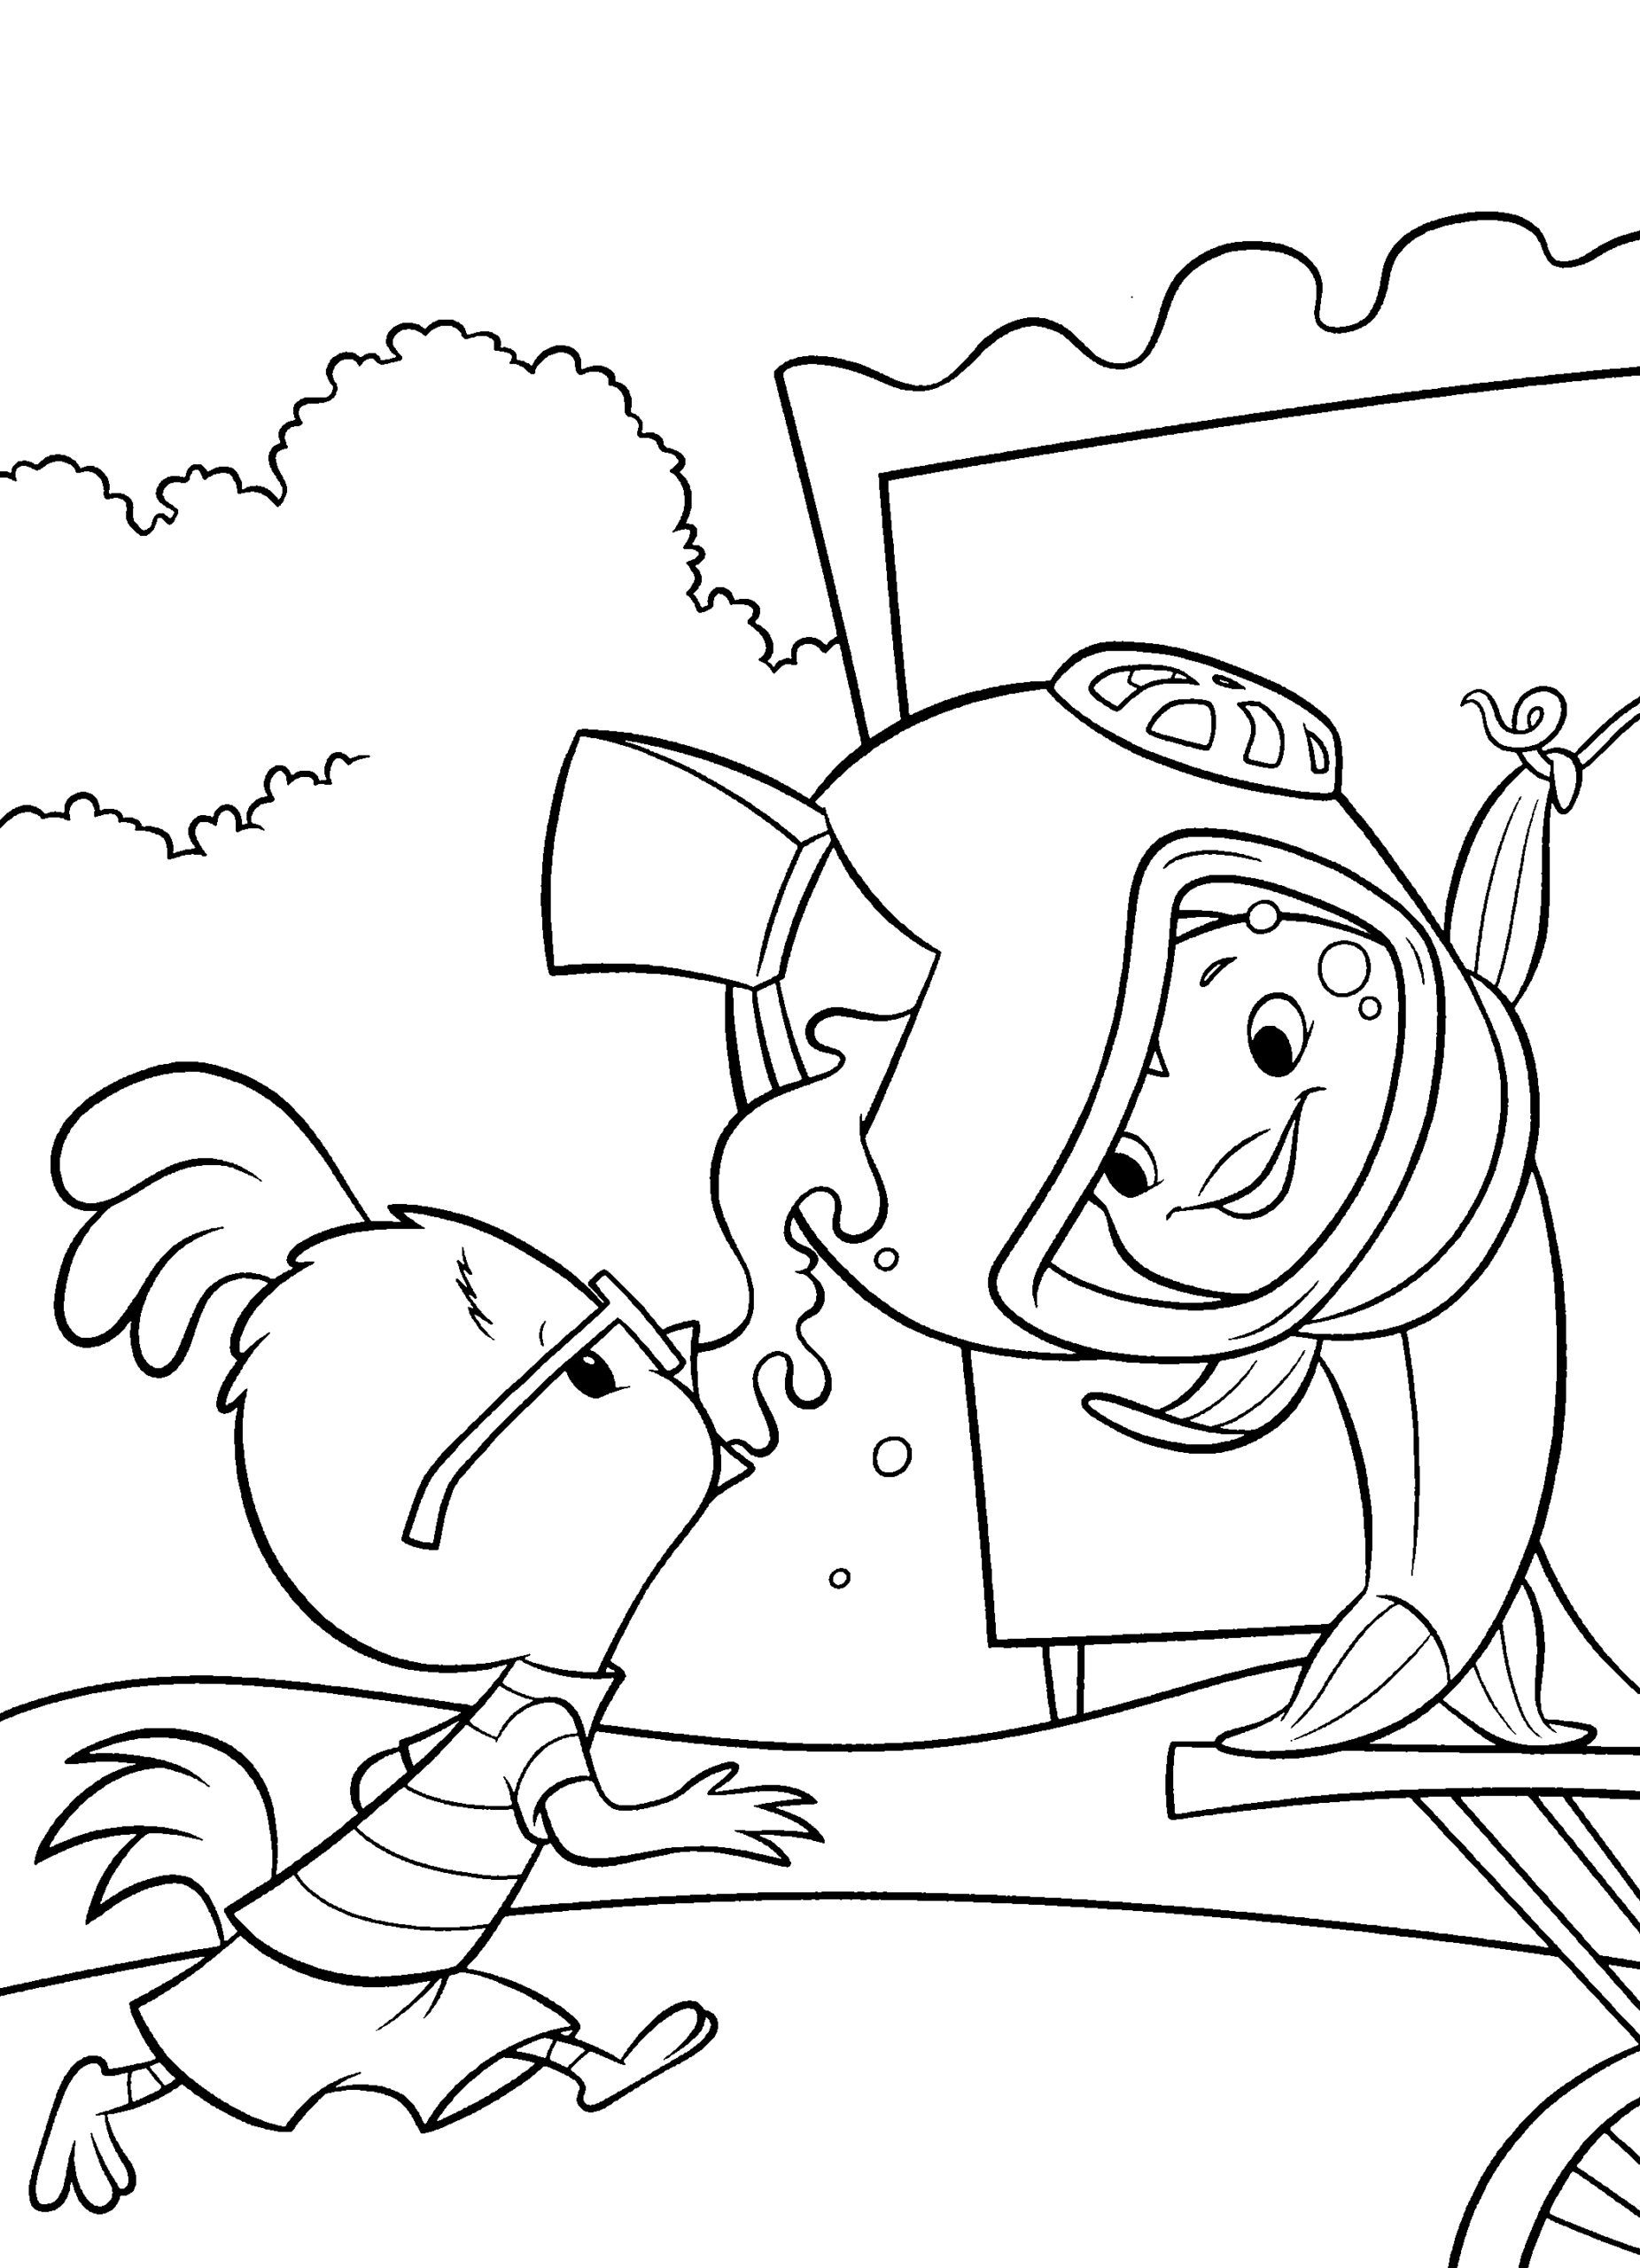 Chicken Little Coloring Pages TV Film Chicken Little Cute Printable 2020 02098 Coloring4free